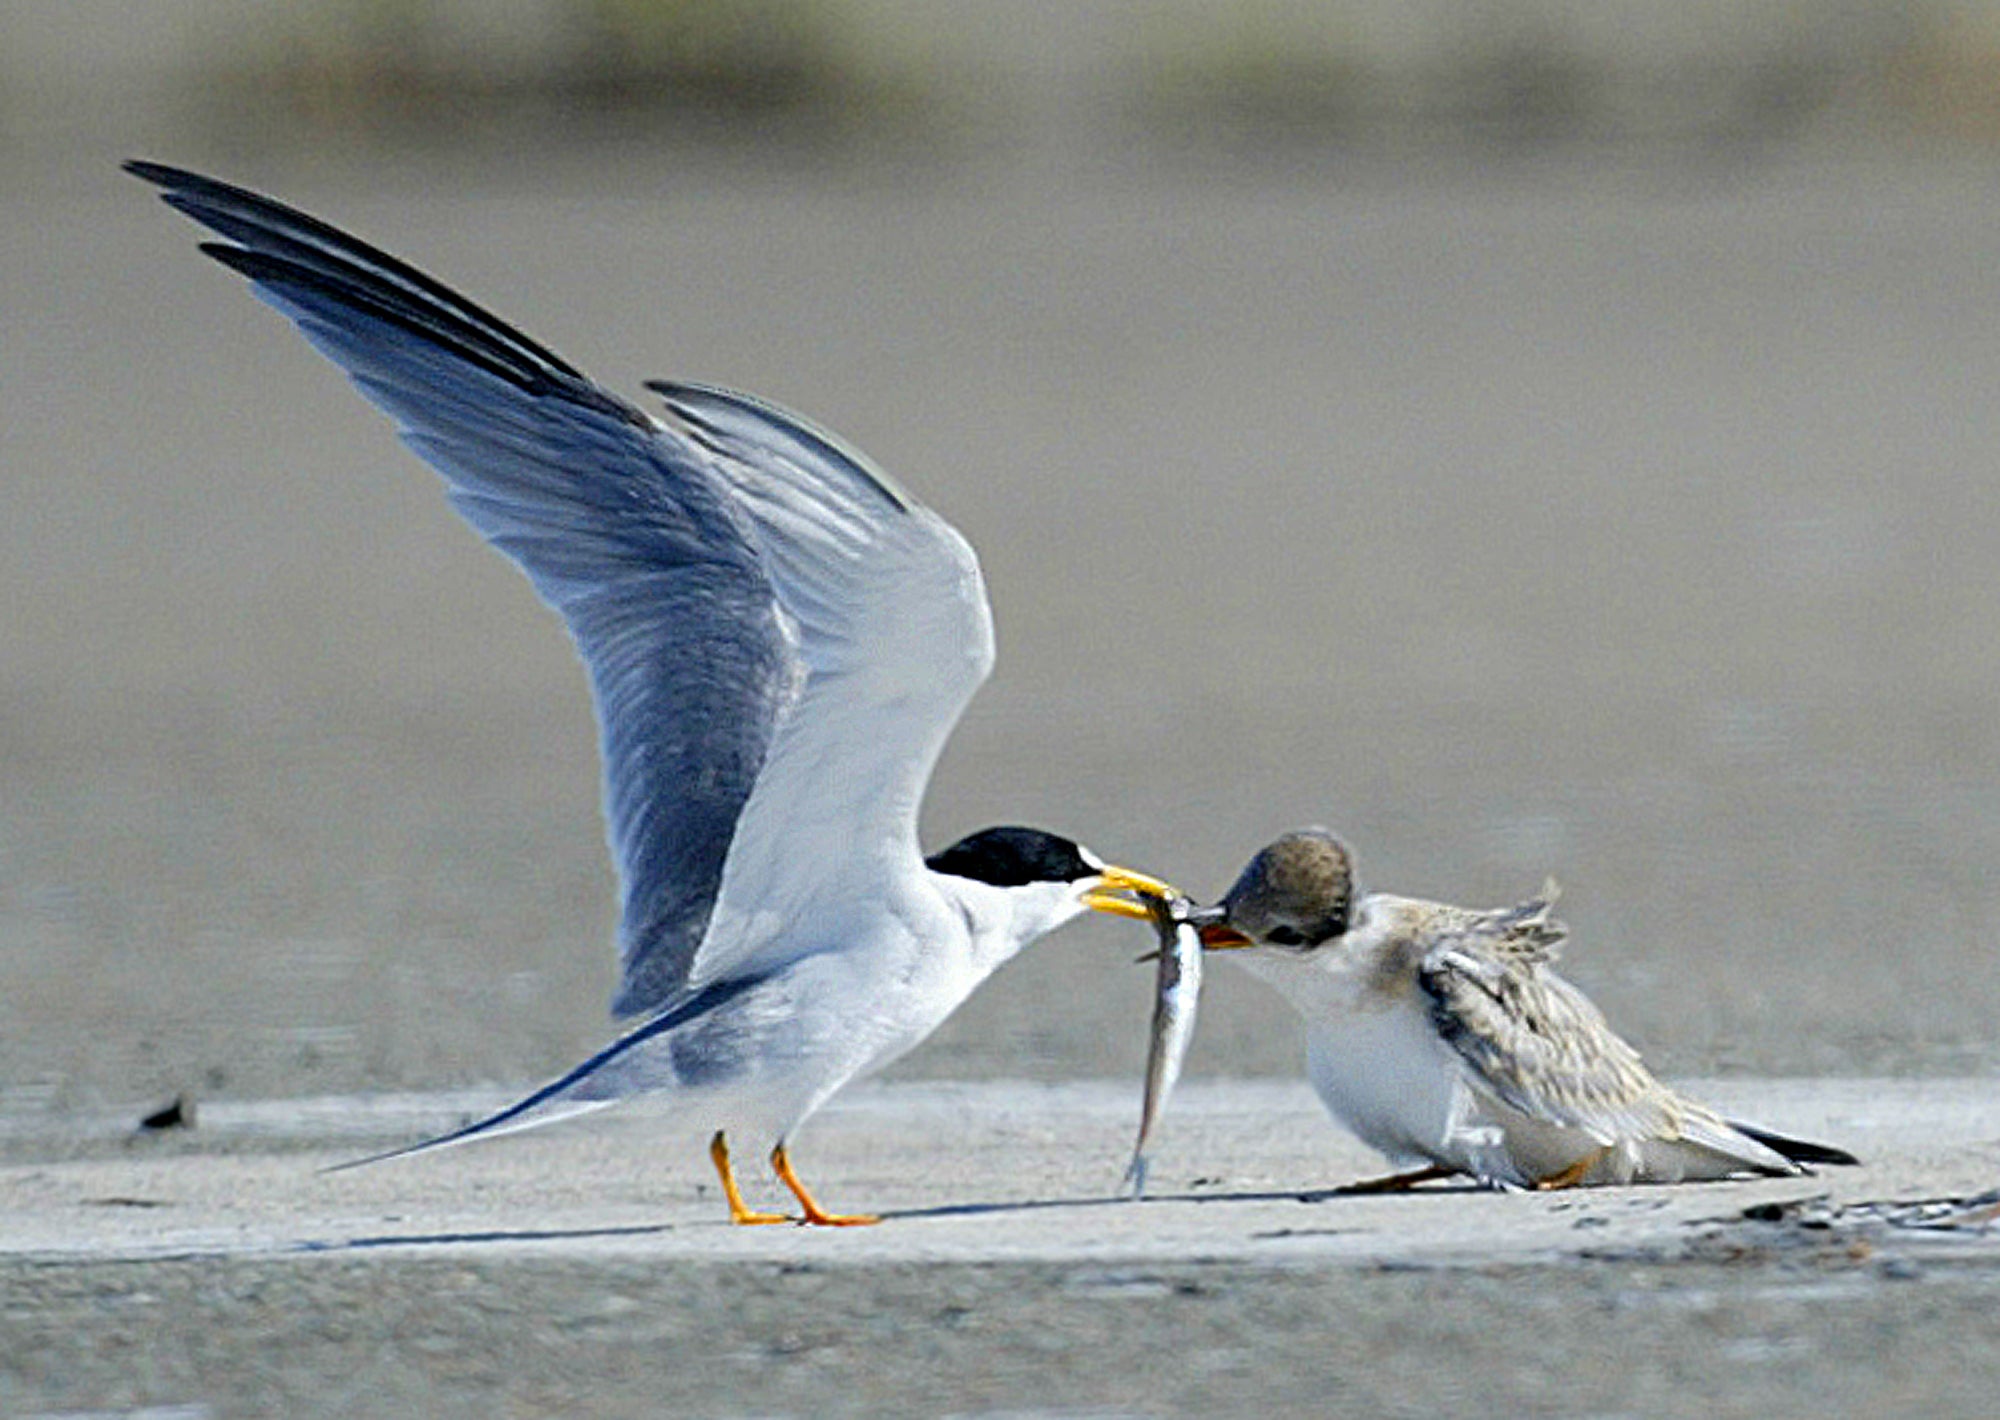 California least tern and fledgling. Photo taken by Aric Crabb.